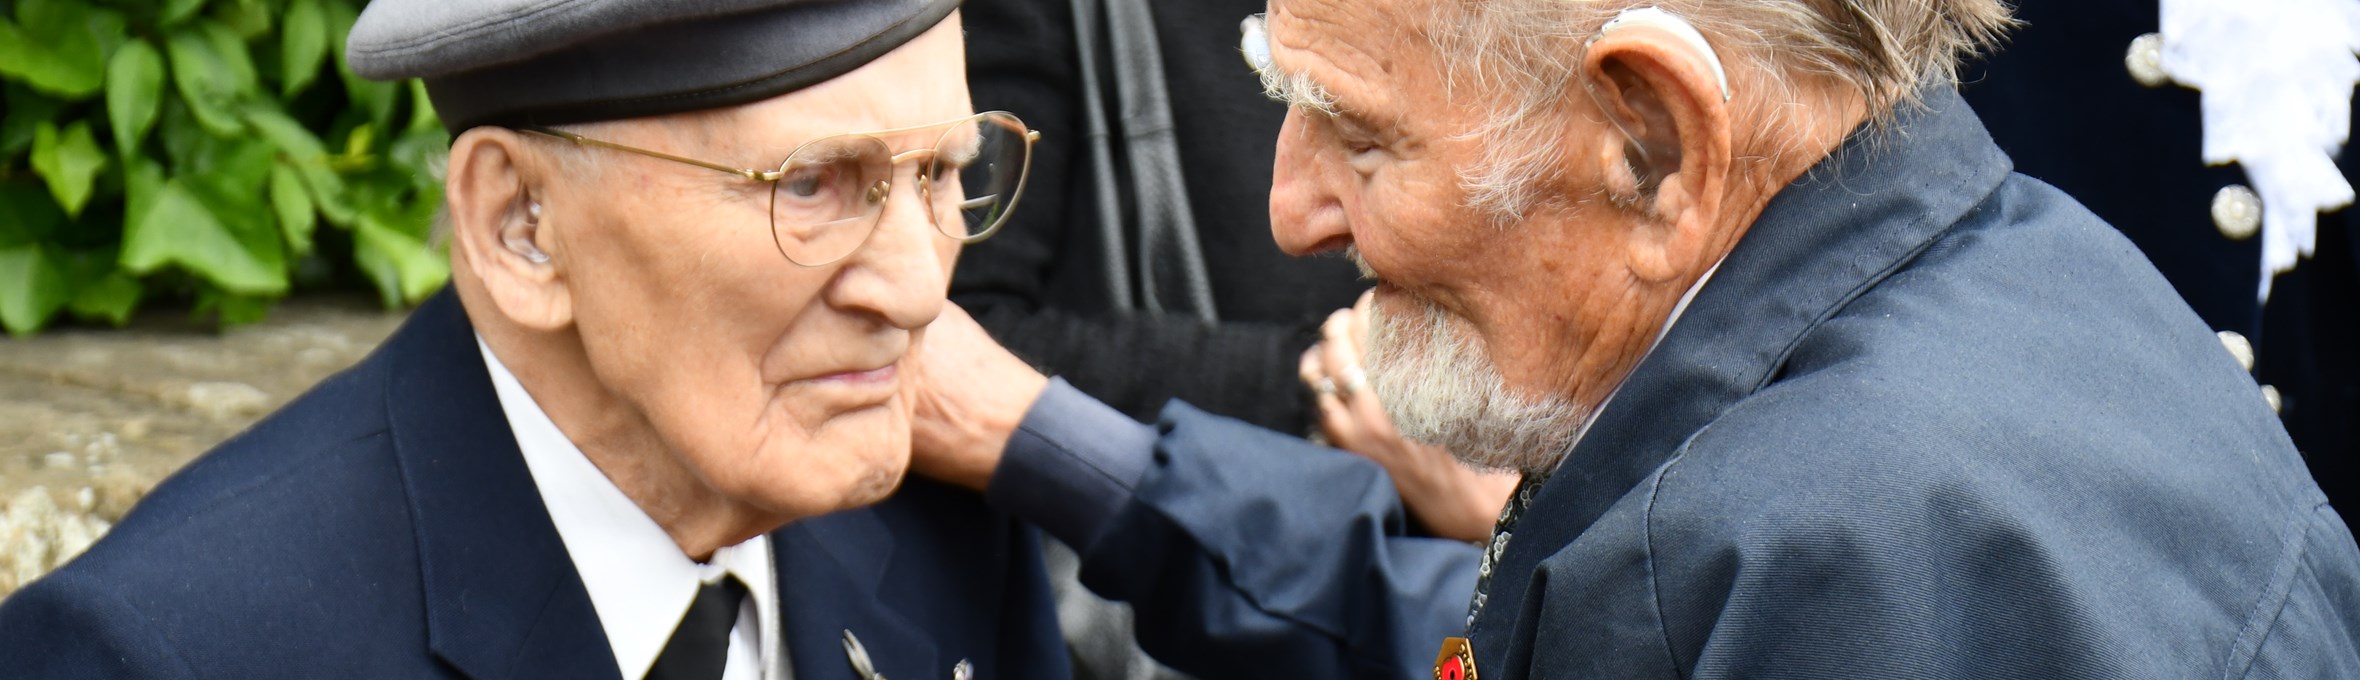 99 year old ex-paratrooper John Fejfer meets Walter Nazar, 97, who fought in the Second World War 